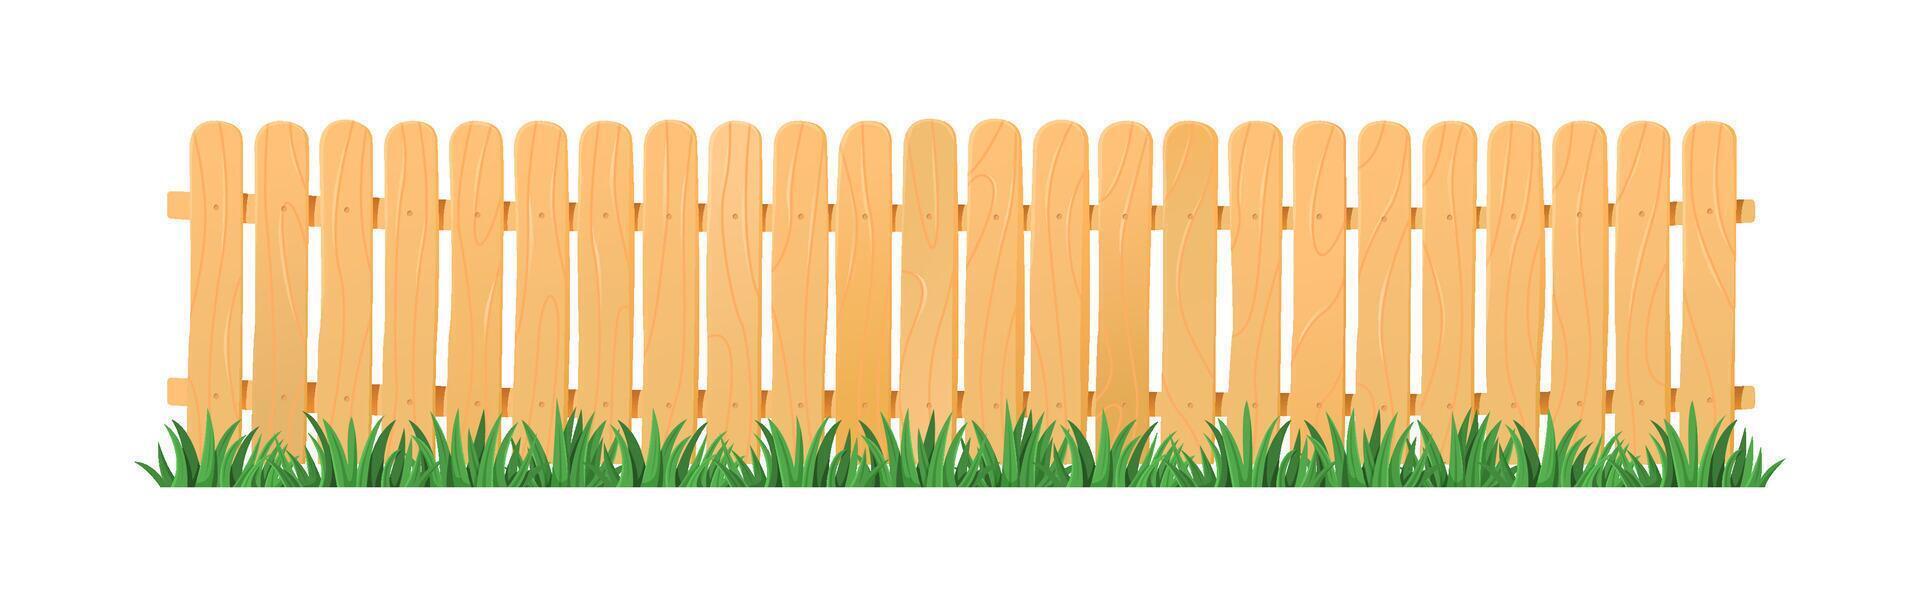 Wooden garden fence with lush green grass. Vector Illustration of barrier with fresh lawn.